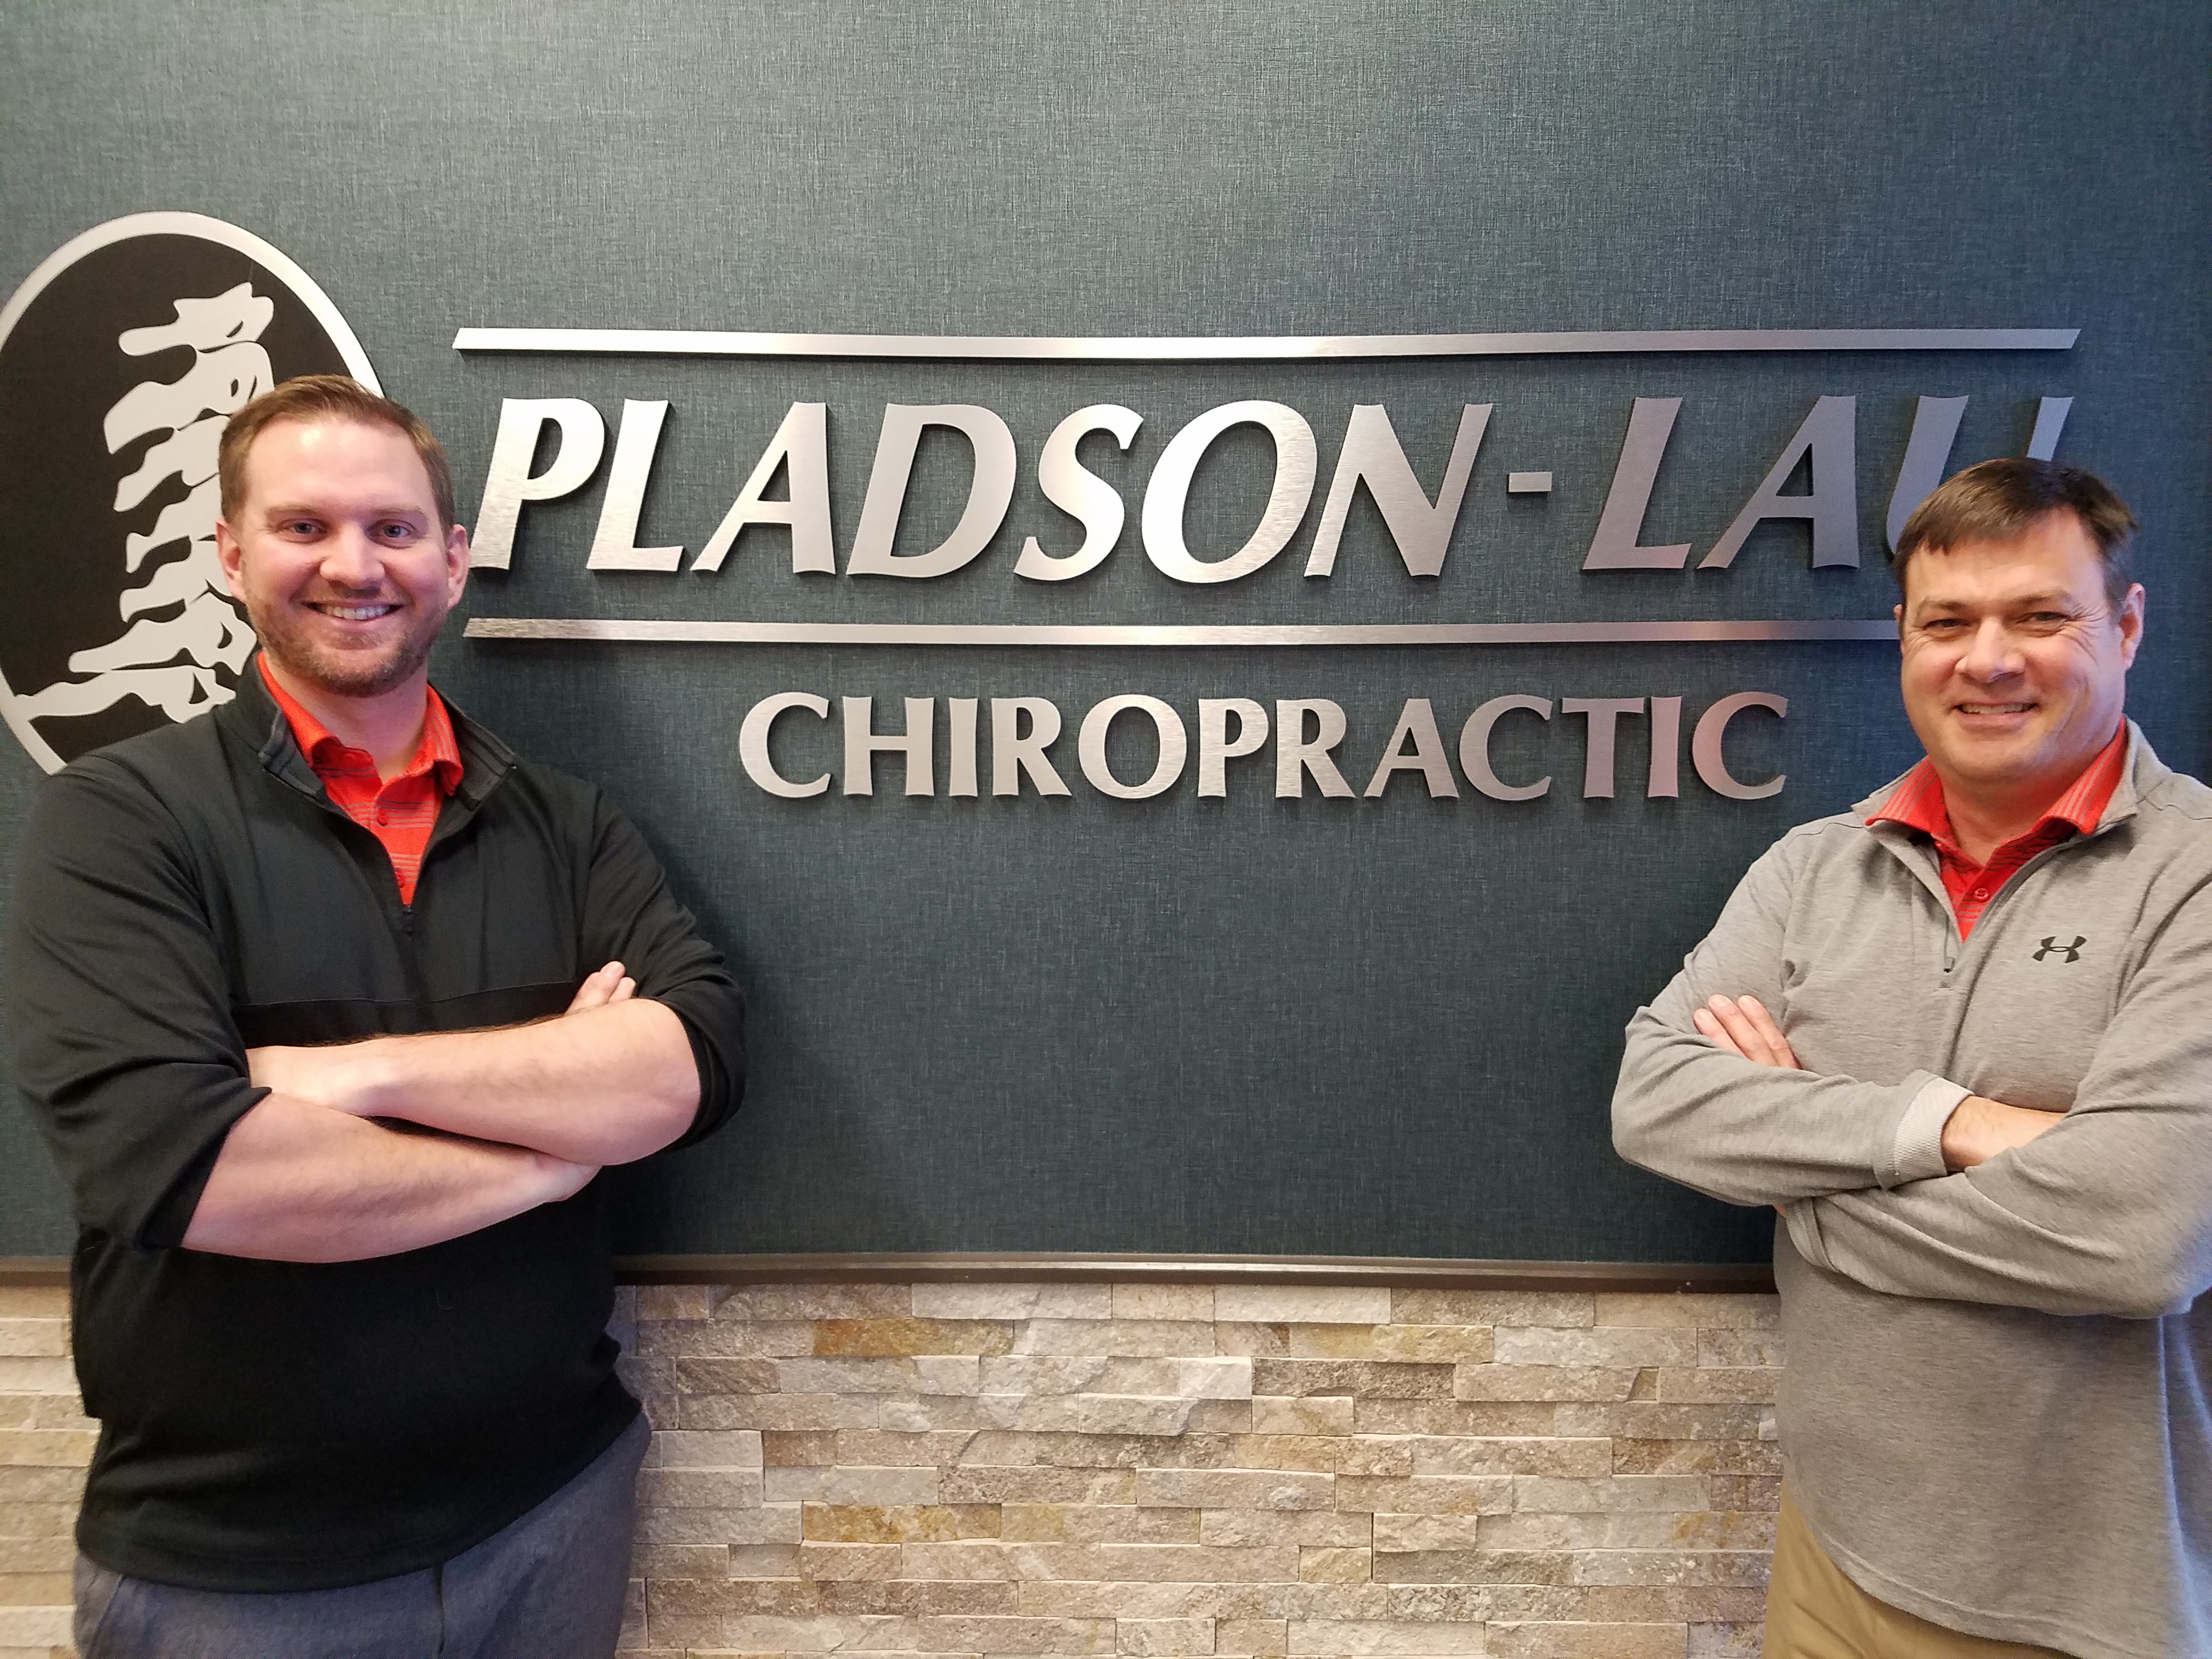 Pladson-Lau Chiropractic Clinic treats the Fargo, ND and Moorhead, MN areas. We work together with the medical doctors from both Sanford Health and Essentia Health. We accept most insurances and treat people and families of all ages. We are located at the Moorhead Center Mall, centrally between NDSU, MSUM and Concordia College.